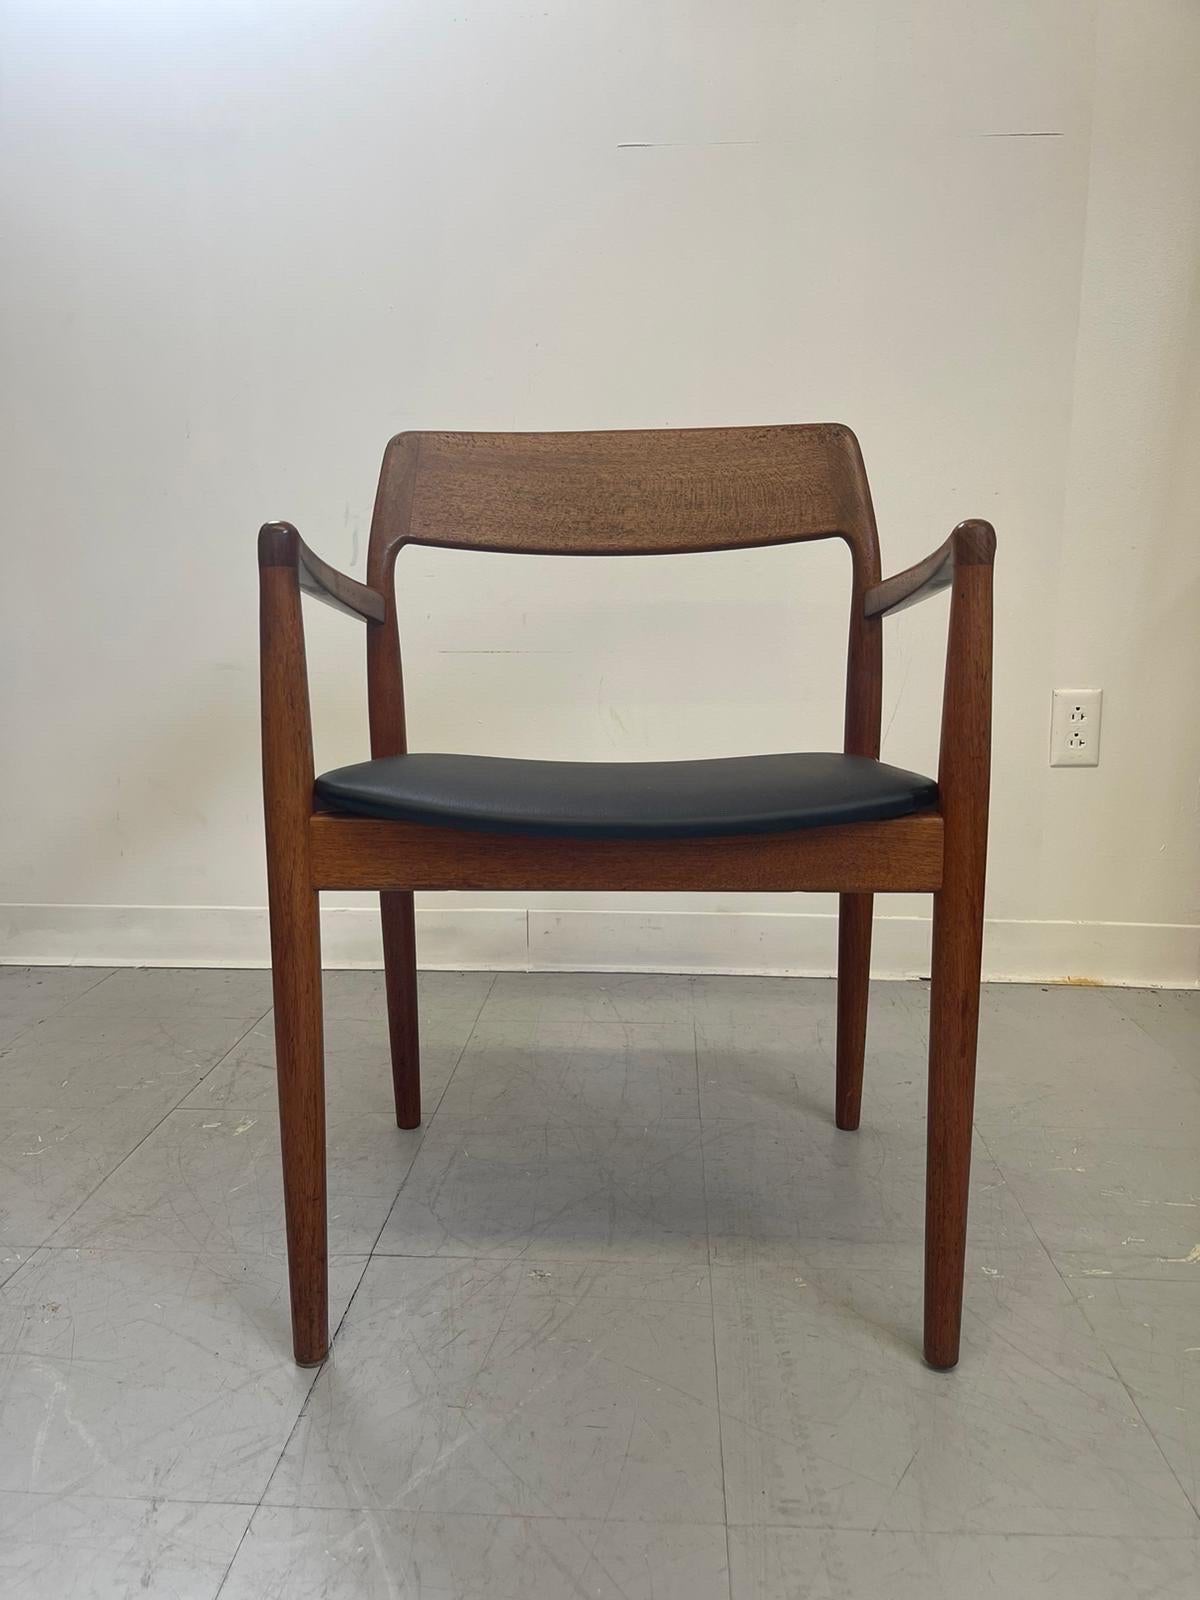 Late 20th Century Vintage Danish Modern Dining Chairs by Jl Moller Set of 4. For Sale